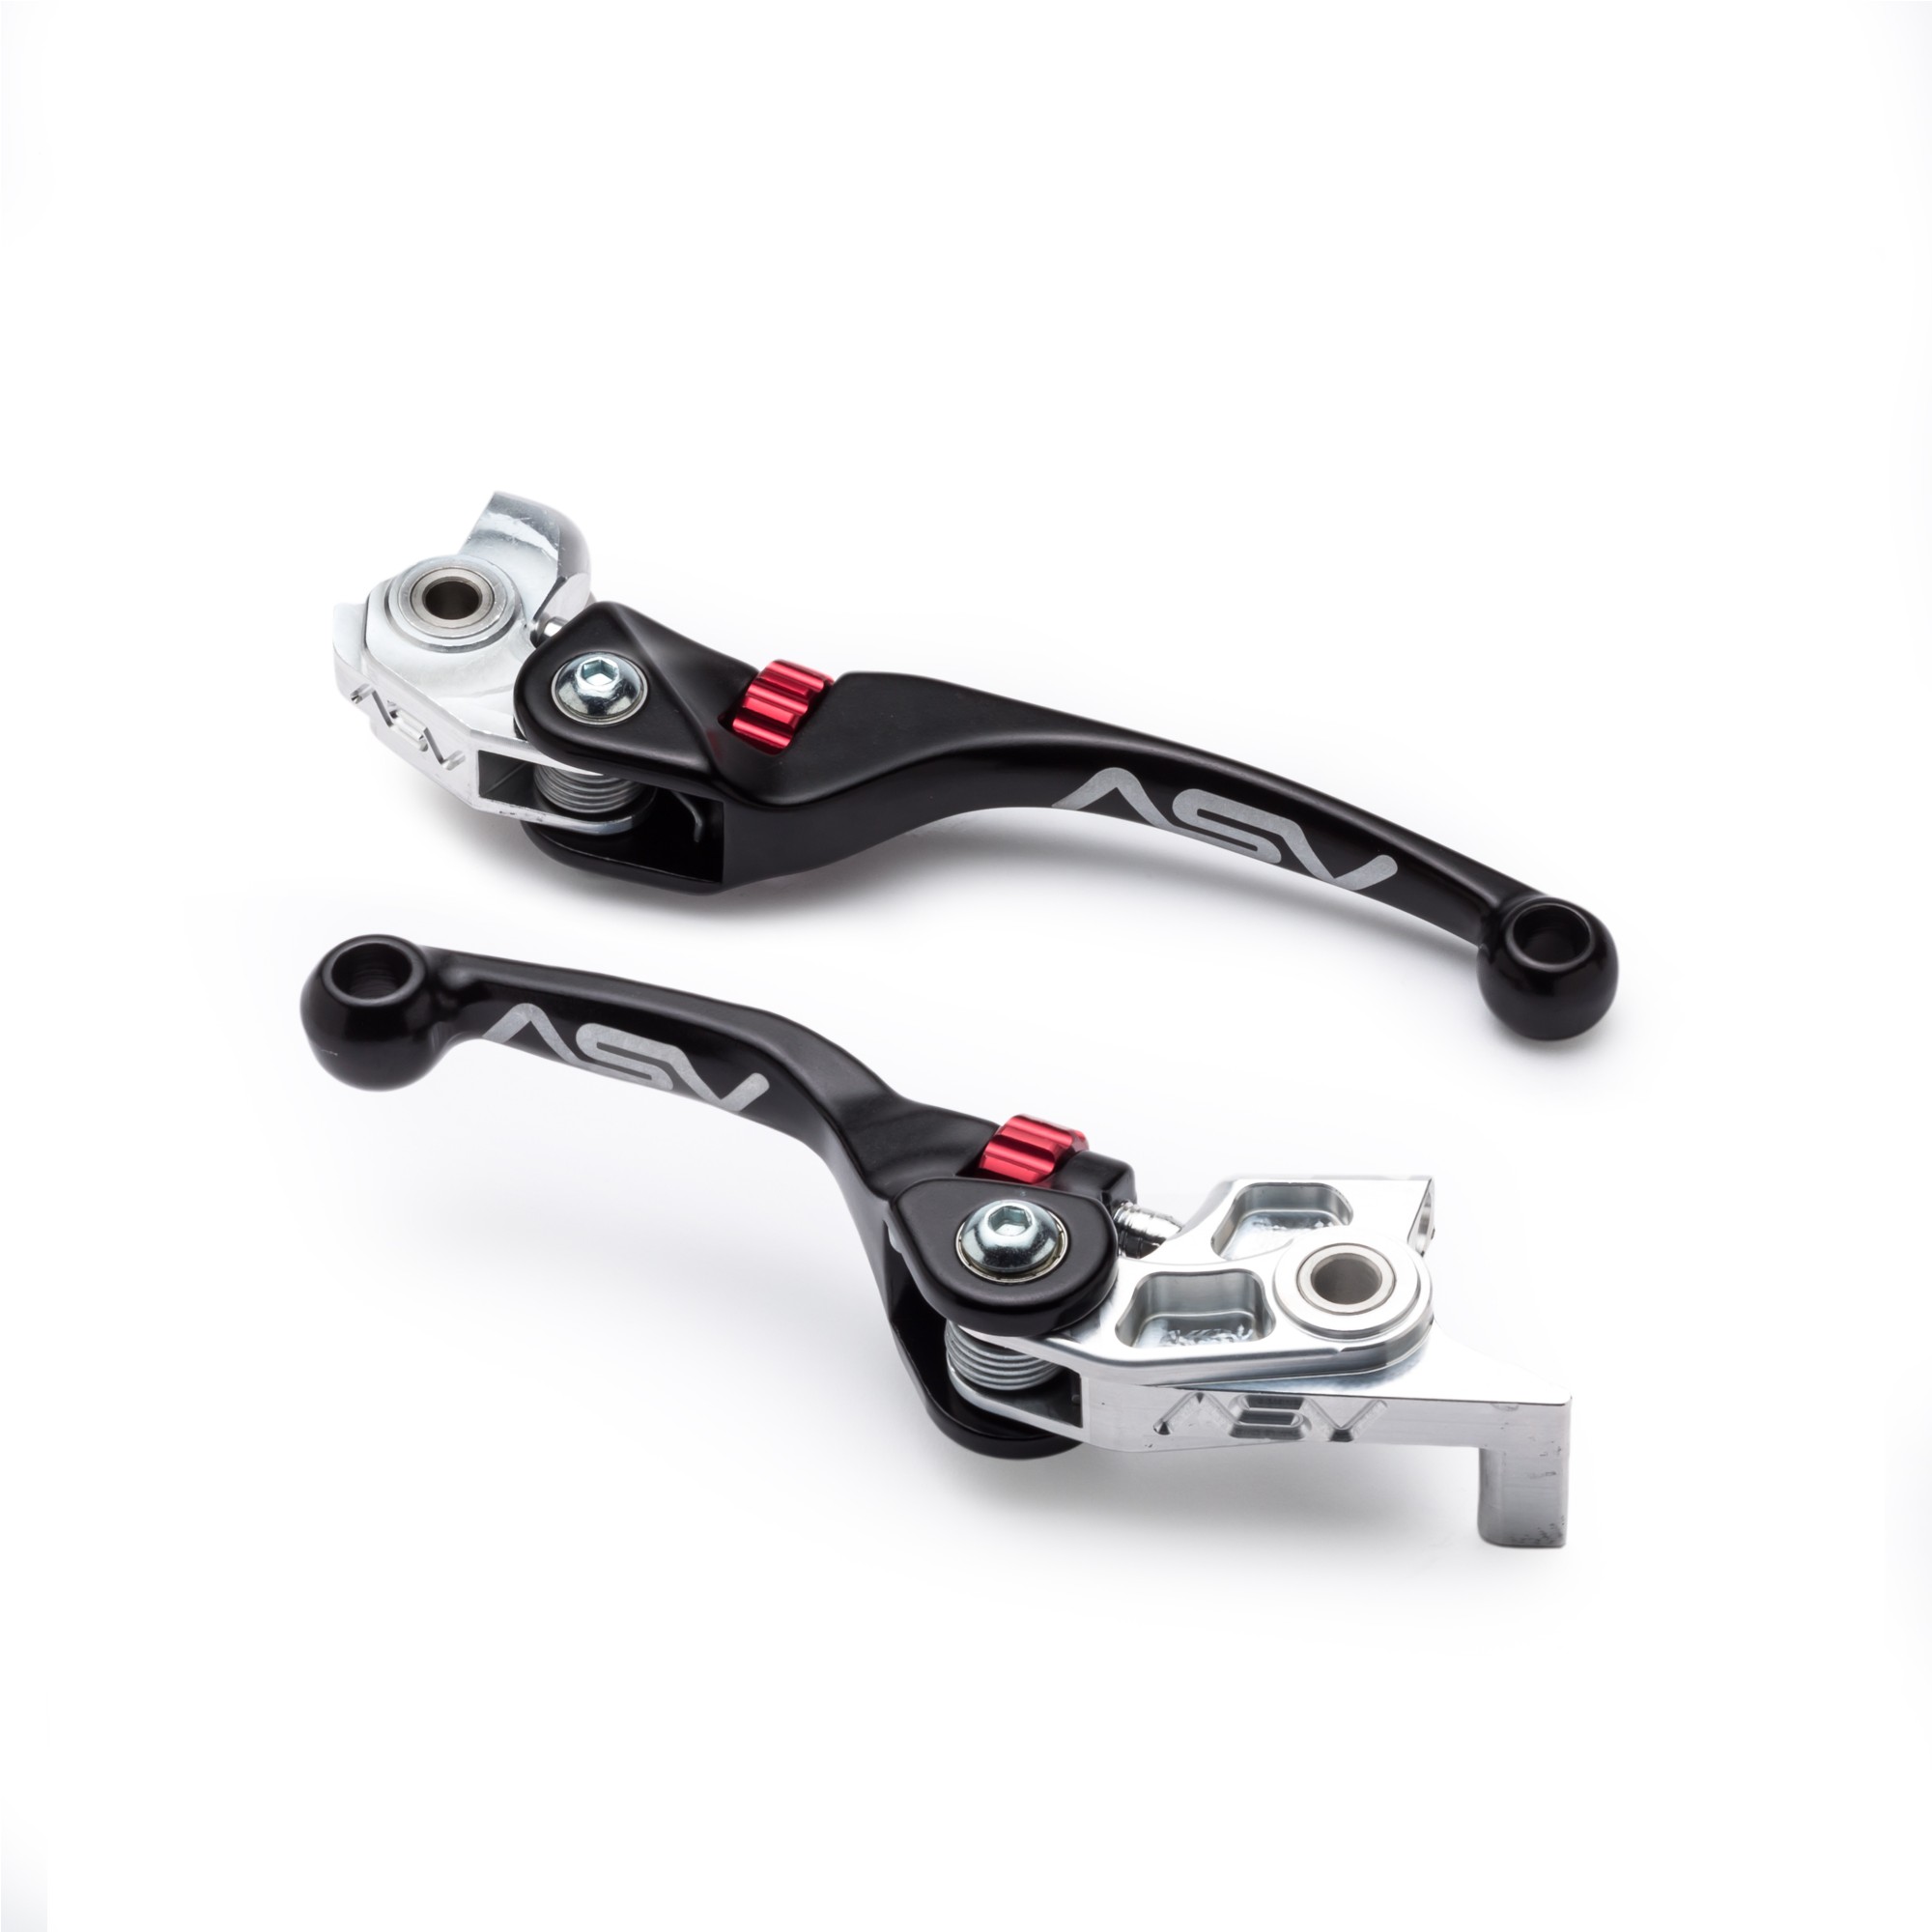 ASV Unbreakable F4 Clutch and Brake Lever Pack # BC F41414 Shorty Black 